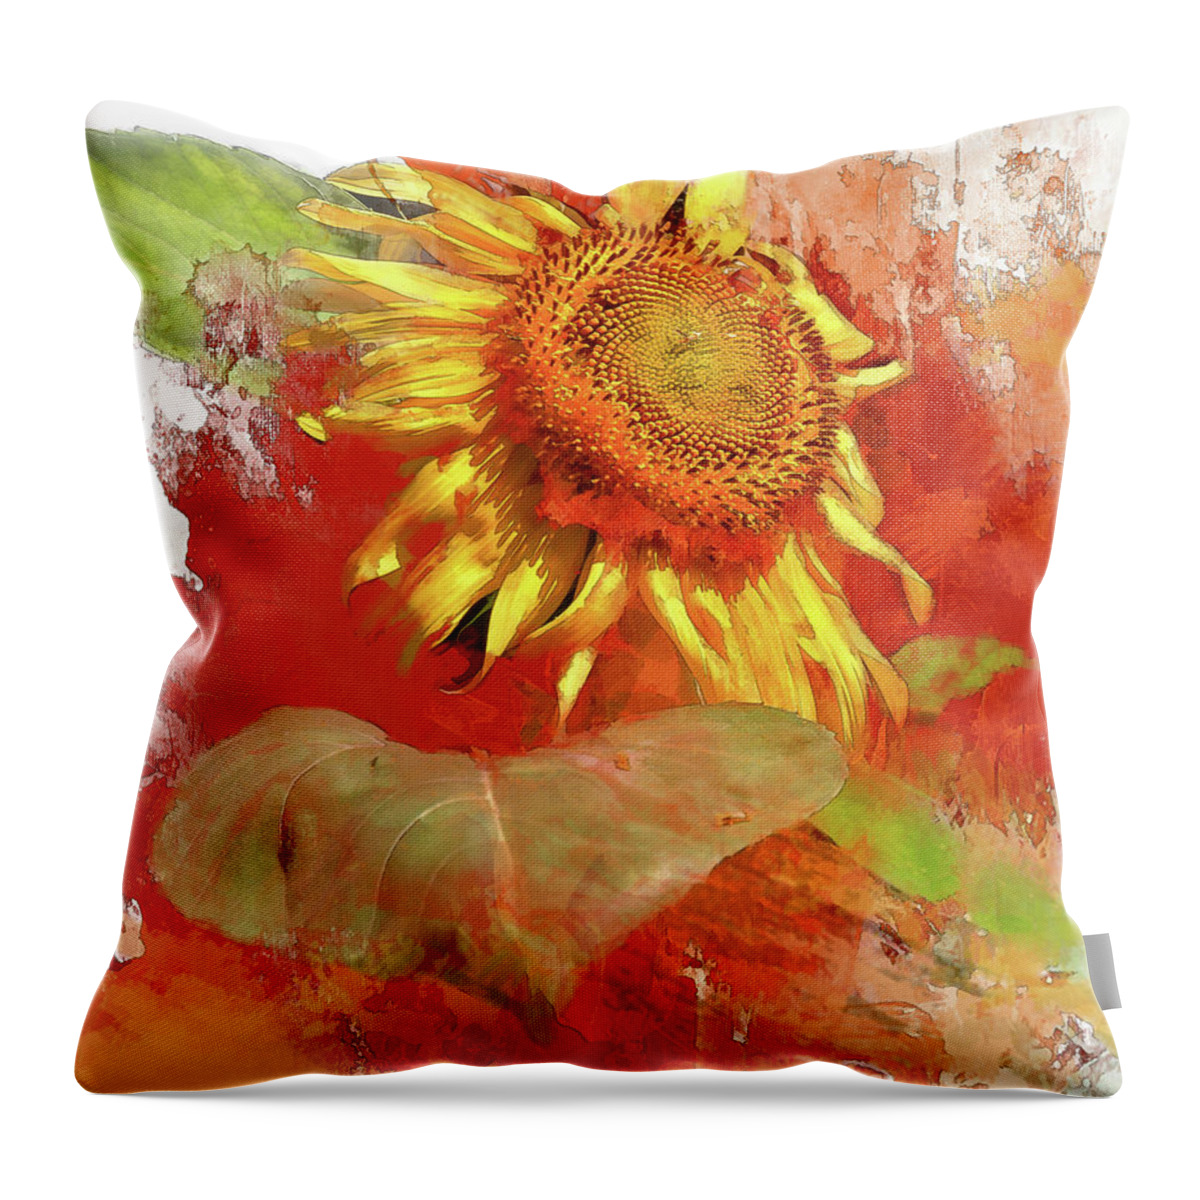  Throw Pillow featuring the digital art Sunflower in Red by Kathy Russell